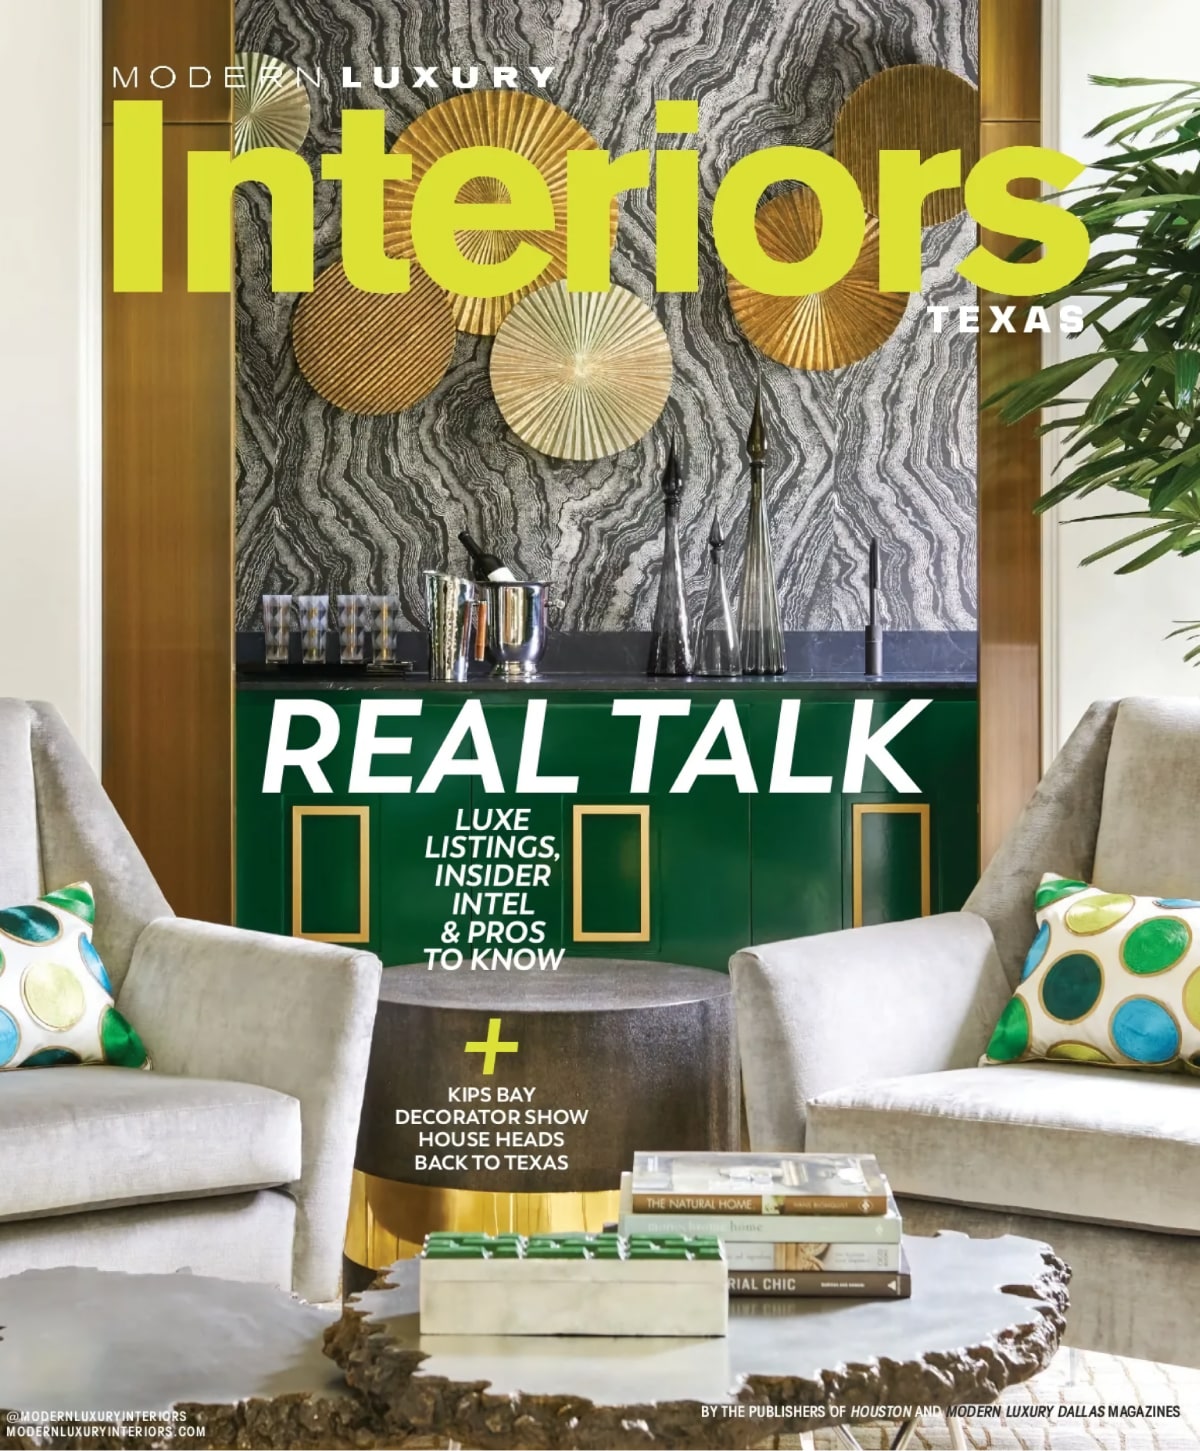 Cover of Modern Luxury Interiors Texas magazine from August 2021